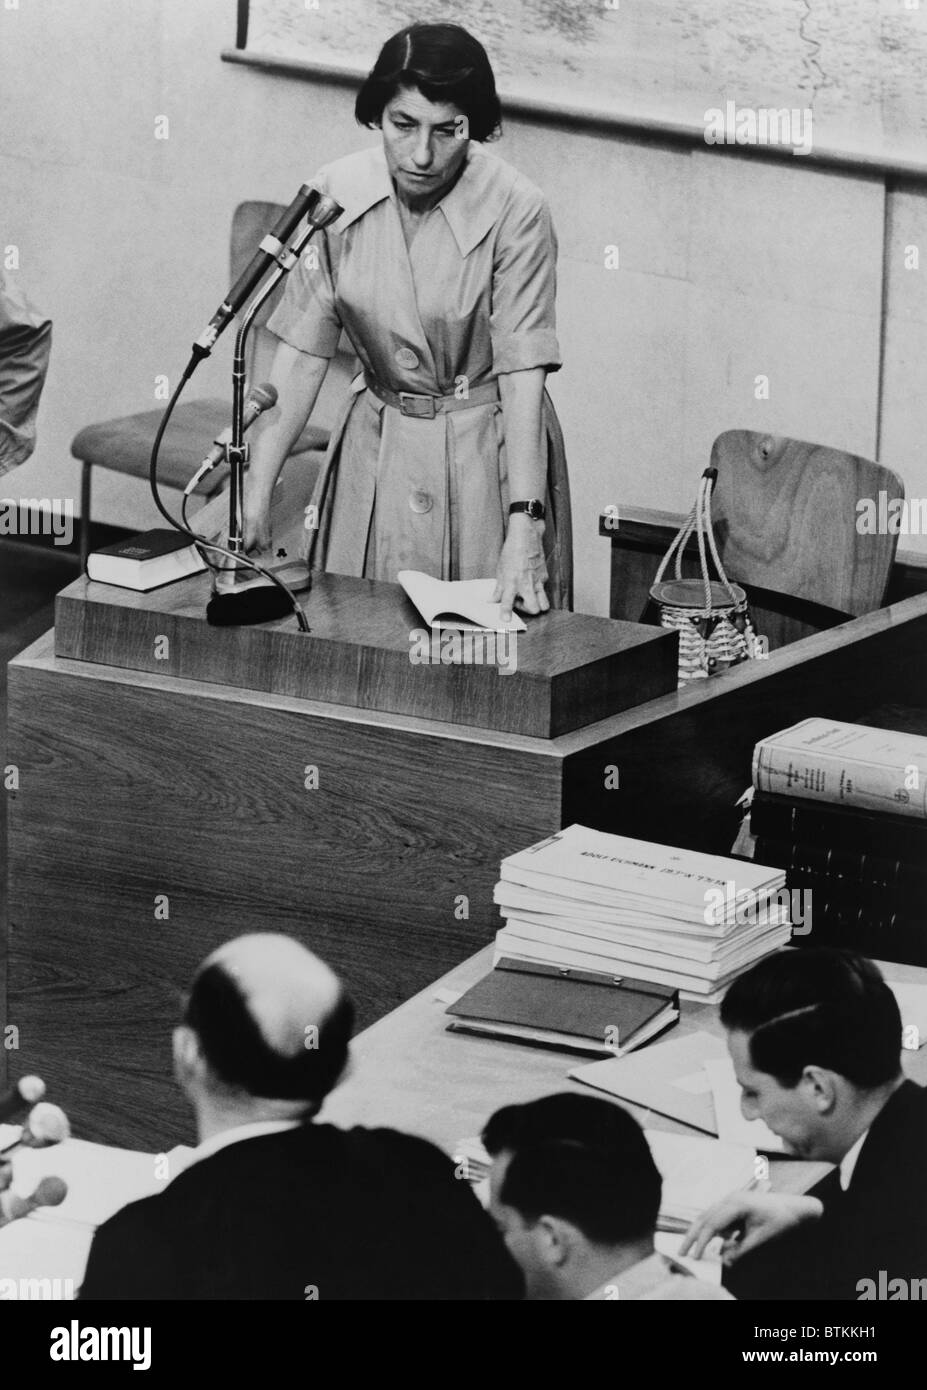 Zivia Lubetkin (1914-1976), testifying at Adolf Eichmann war crimes trial in Jerusalem. She was a leader in the Polish Jewish Resistance during World War II, and fought in the Warsaw Ghetto Uprising. After the war she lead the rehabilitation of Holocaust victims and entered Palestine in 1946. Stock Photo